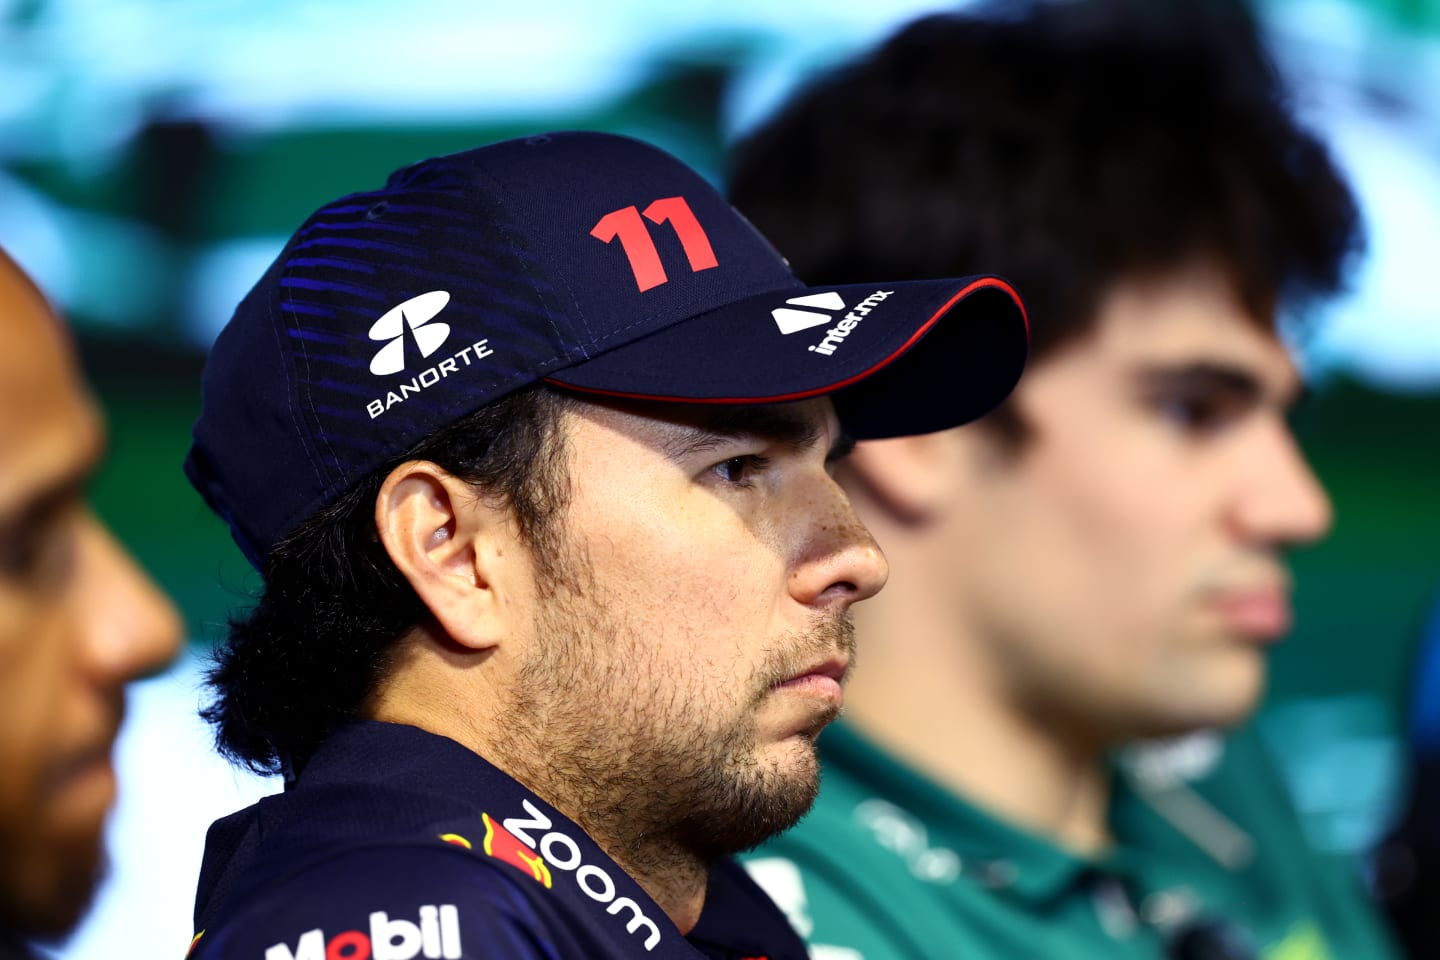 JEDDAH, SAUDI ARABIA - MARCH 16: Sergio Perez of Mexico and Oracle Red Bull Racing looks on in the Drivers Press Conference during previews ahead of the F1 Grand Prix of Saudi Arabia at Jeddah Corniche Circuit on March 16, 2023 in Jeddah, Saudi Arabia. (Photo by Bryn Lennon/Getty Images)